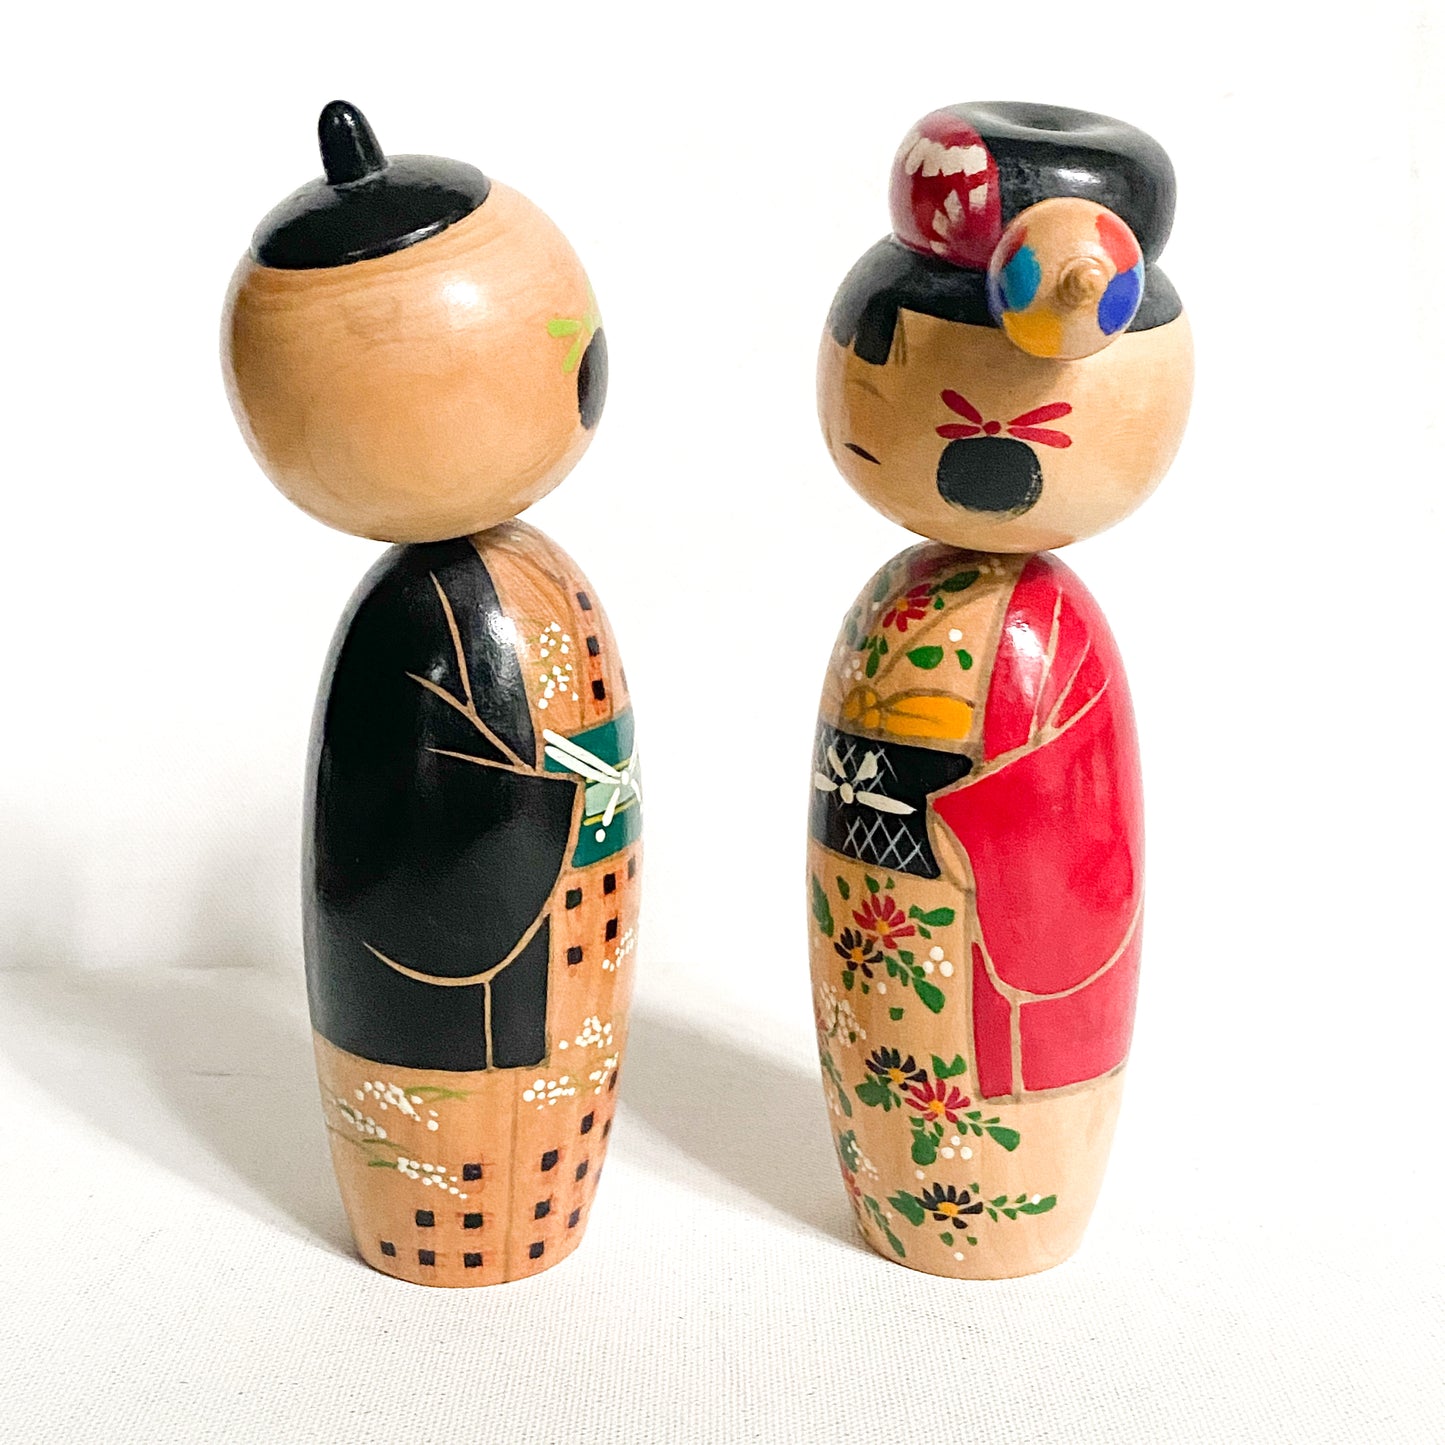 Vintage Kokeshi Doll Pair with nodding heads